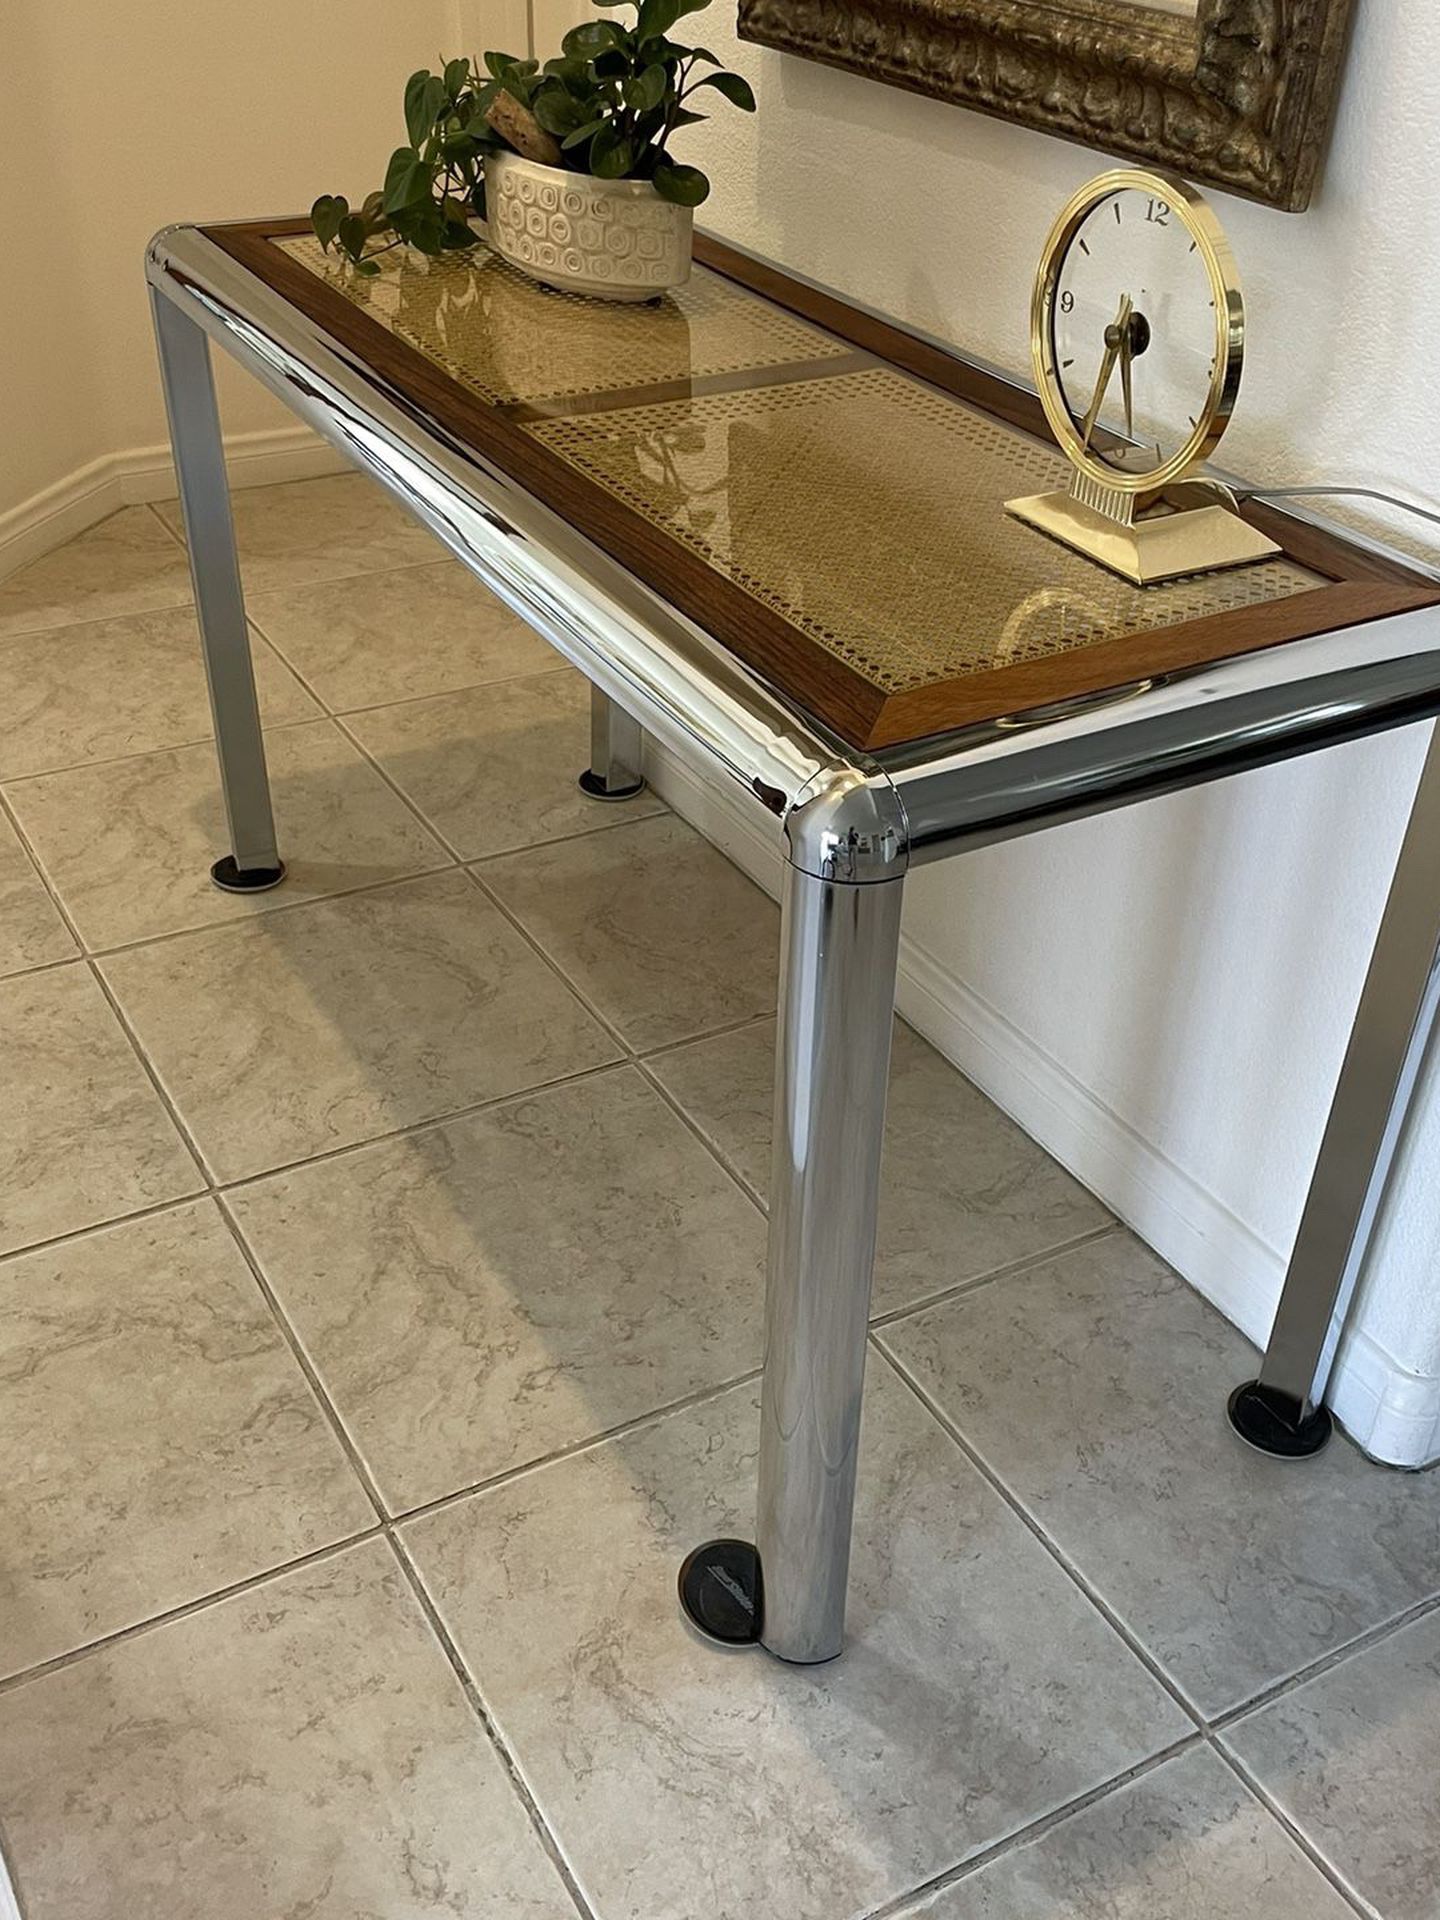 Mid Century Chrome And Cane Console Table With Glass Top In The Style Of Milo Baughman For Design Instatute Of America  52”x30”x22”D